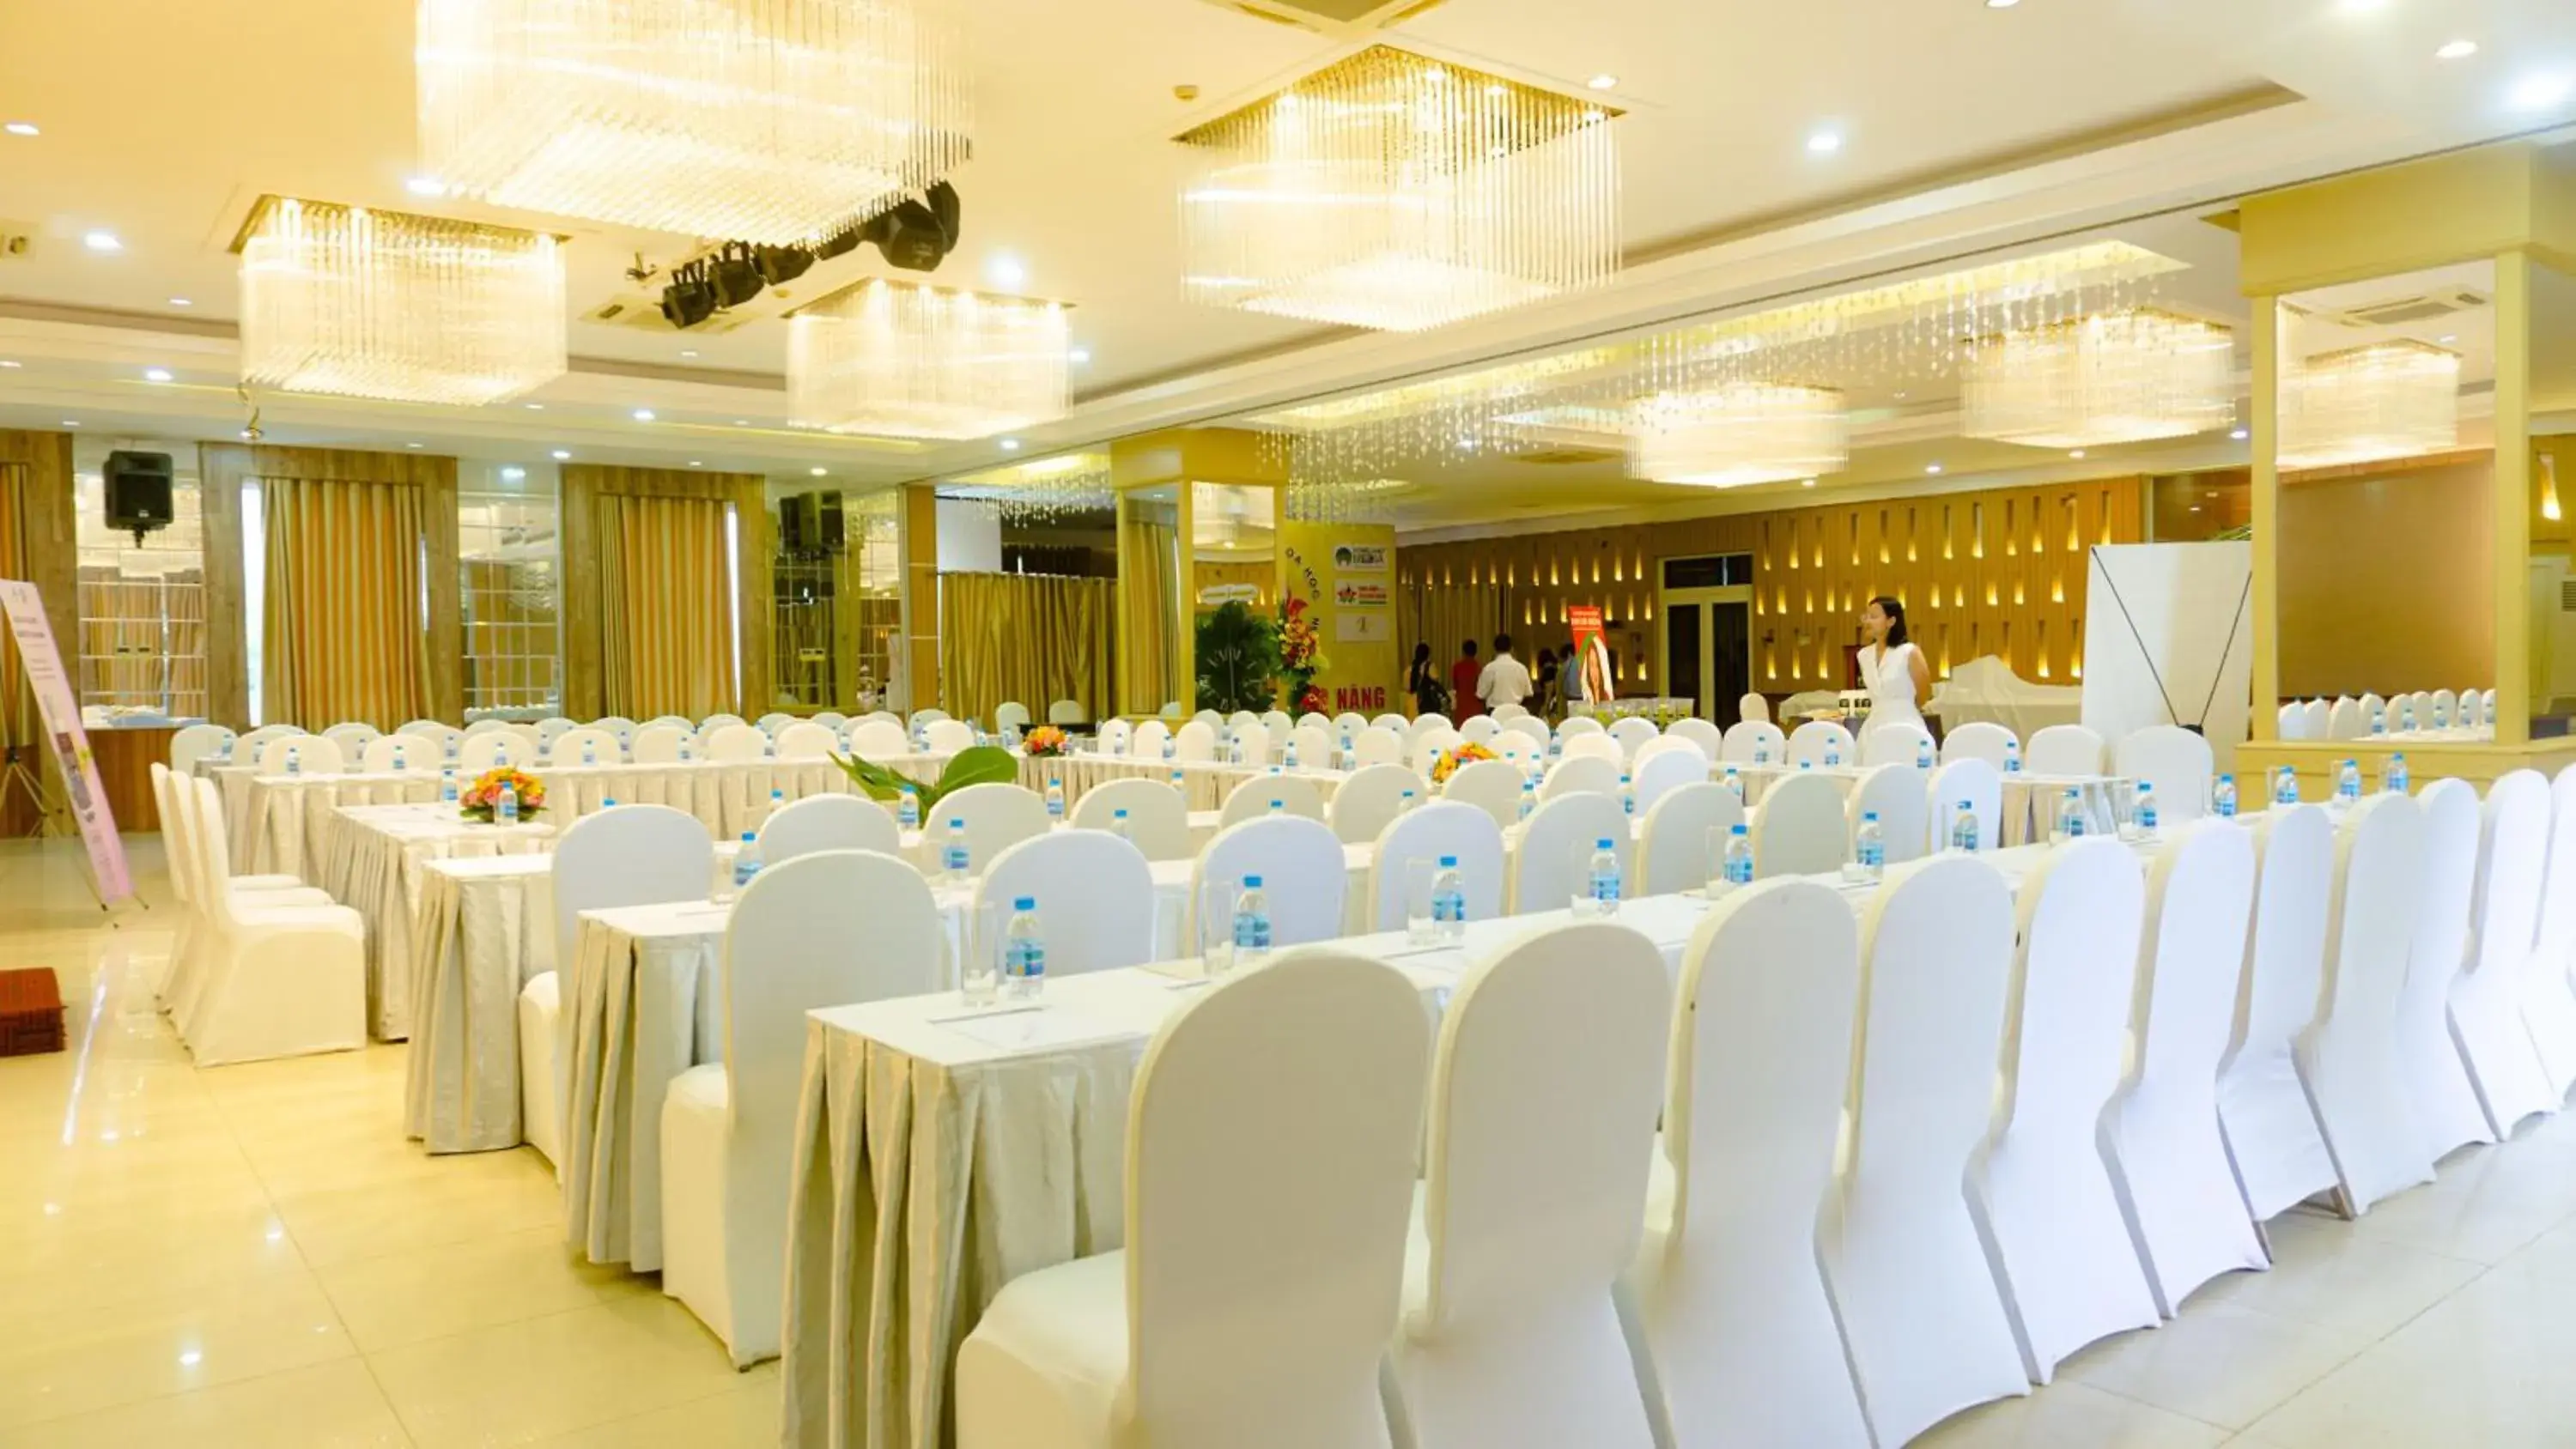 Meeting/conference room, Banquet Facilities in The Light Hotel